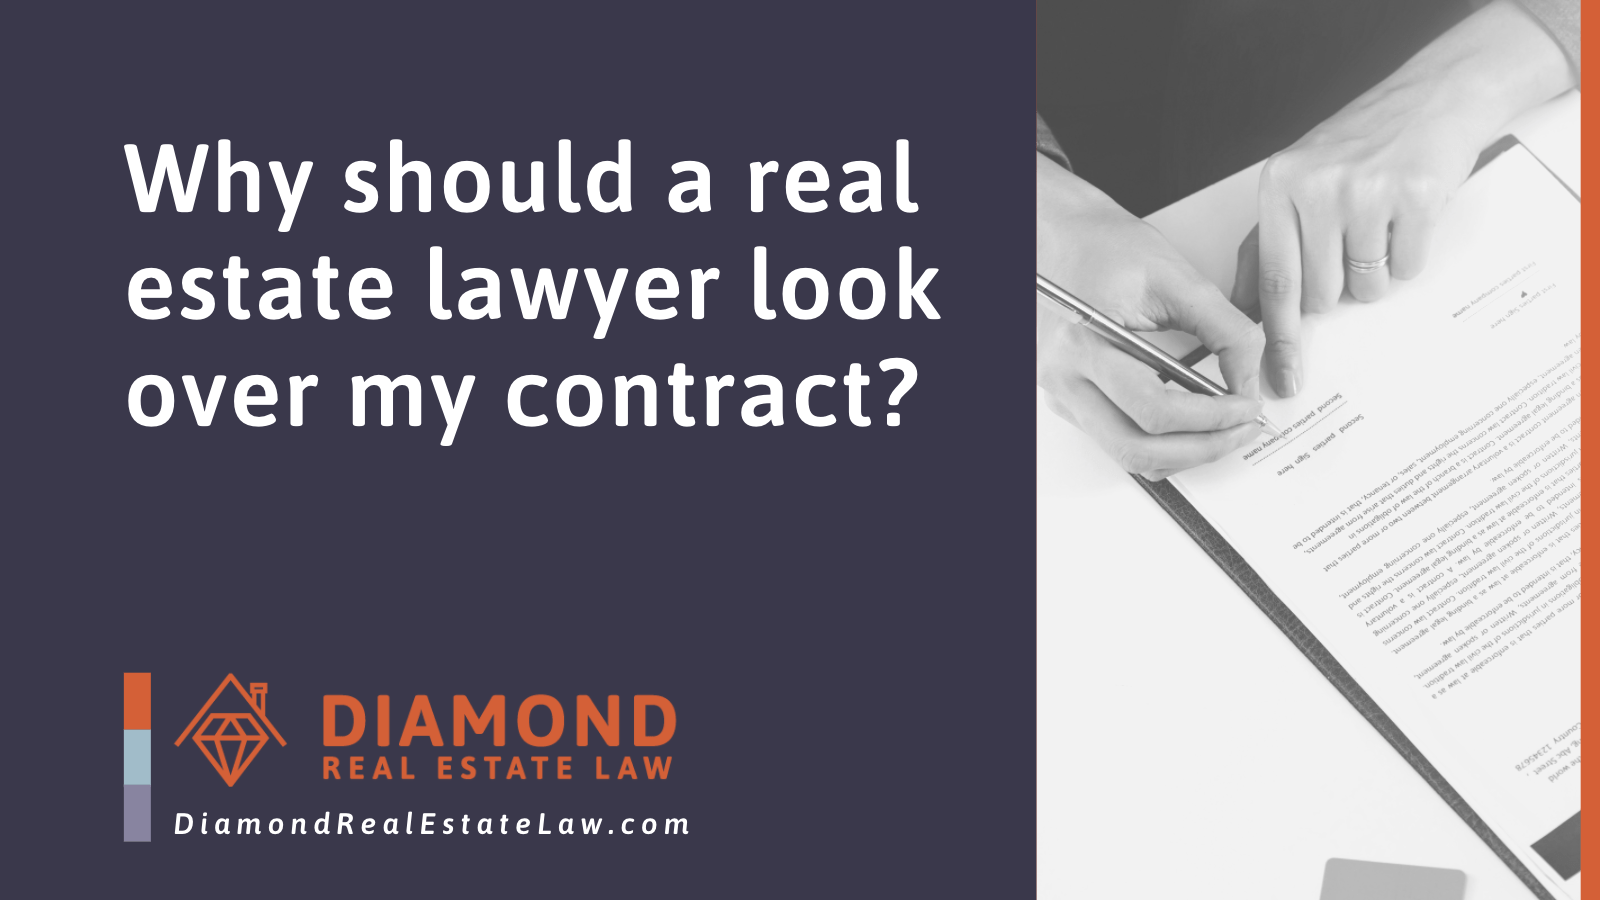 Why should a real estate lawyer look over my contract - Diamond Real Estate Law | McHenry, IL Residential Real Estate Lawyer